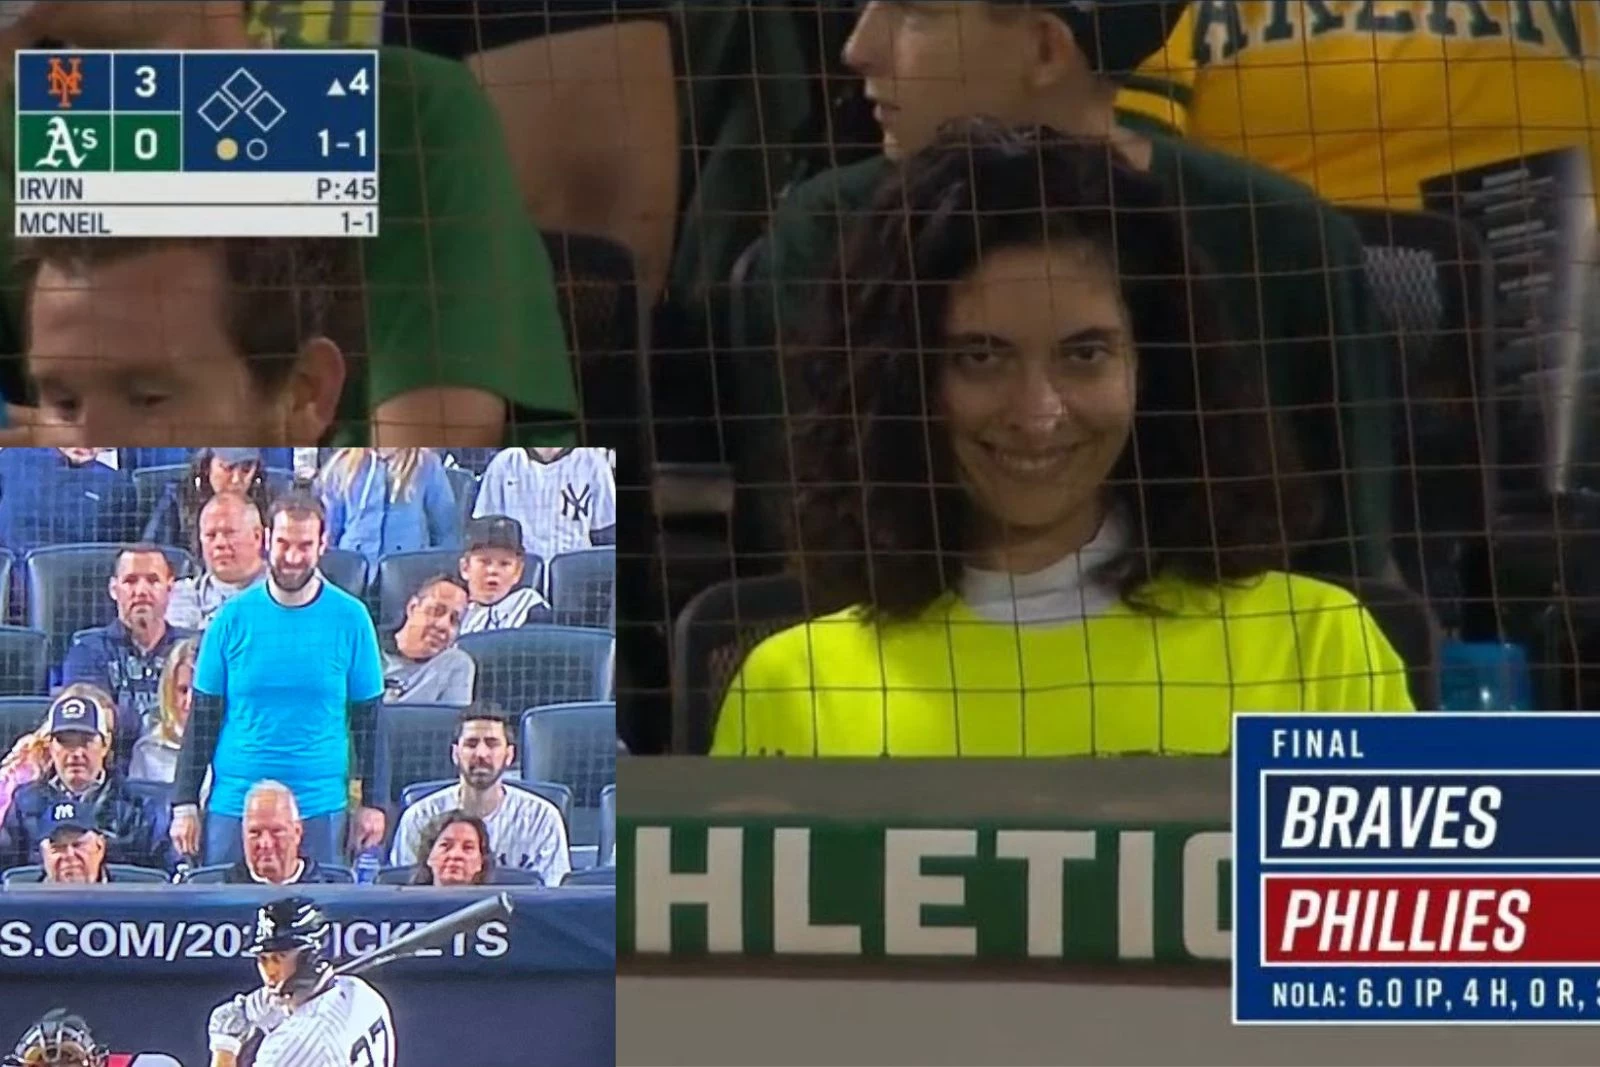 The Creepy People Sitting Behind Home Plate Are Advertising a Movie